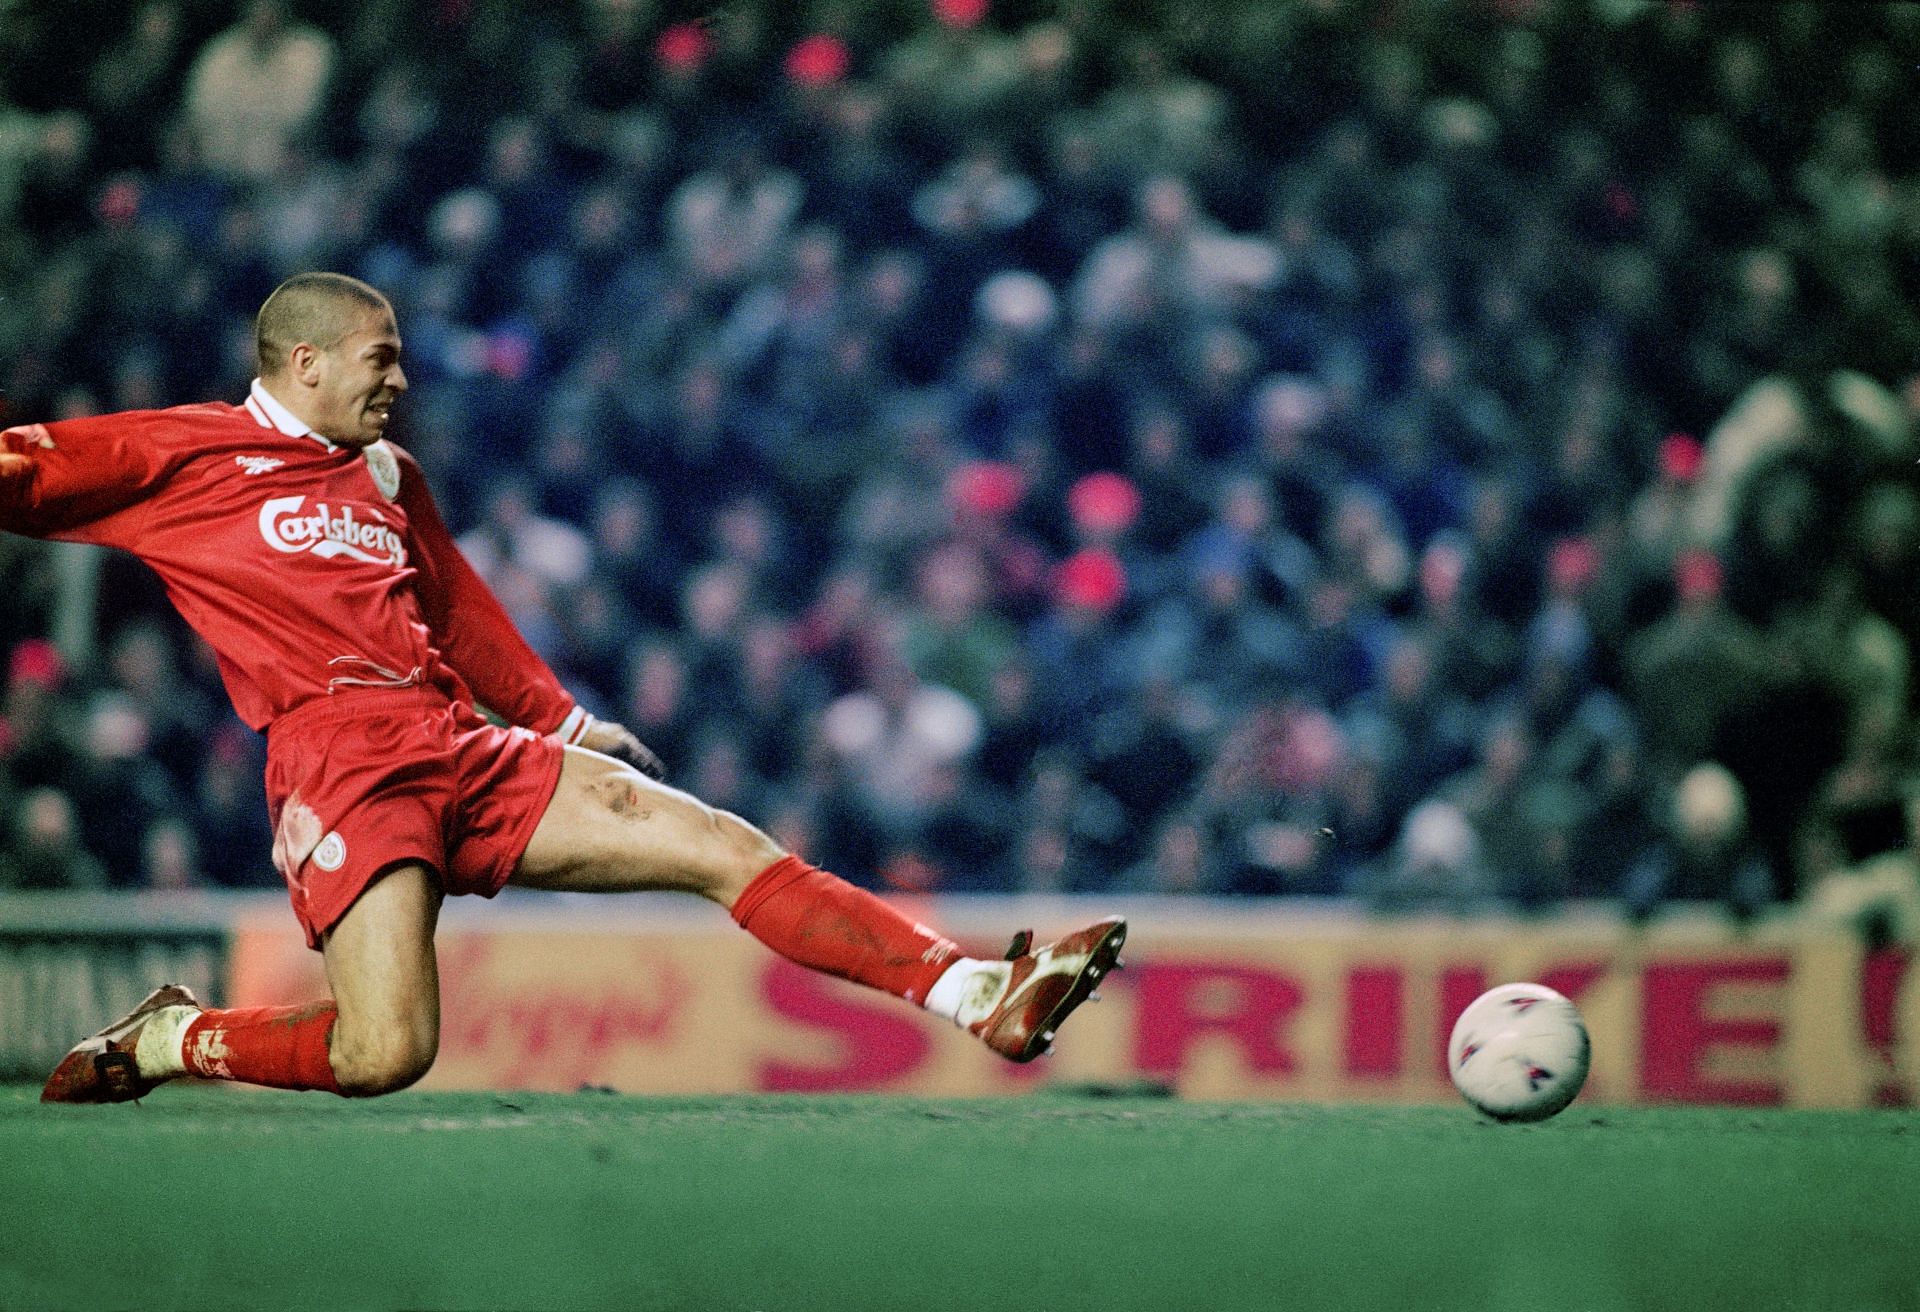 Collymore in action in the Premier League